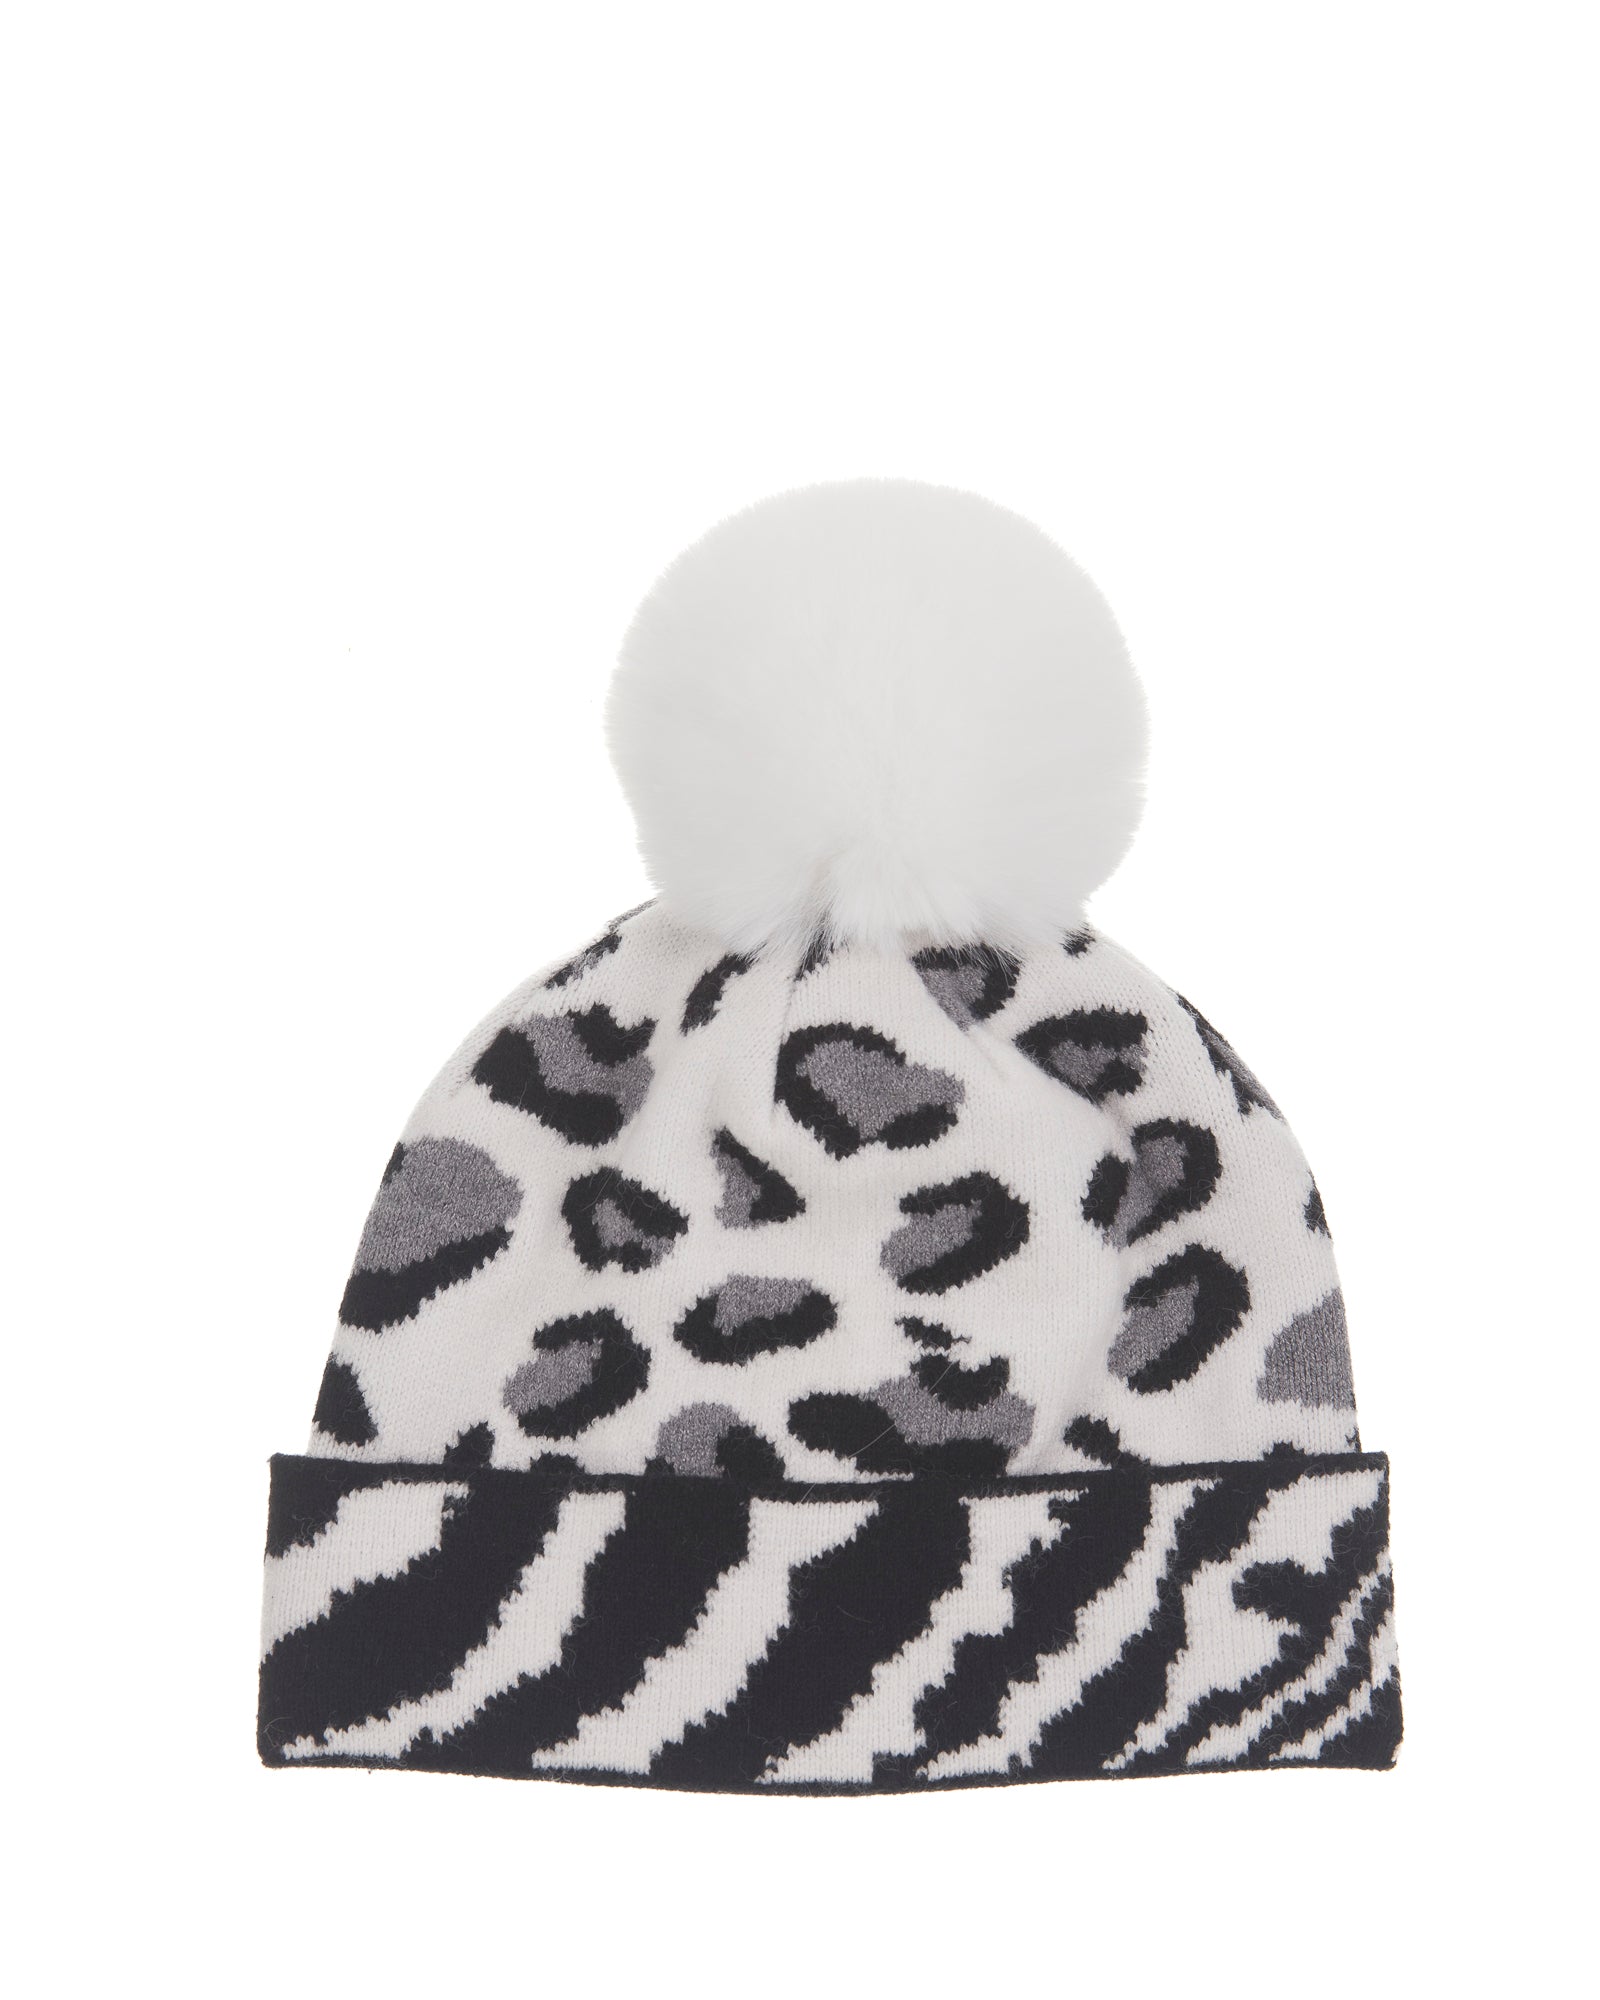 Mixed Animal Print Hat in White